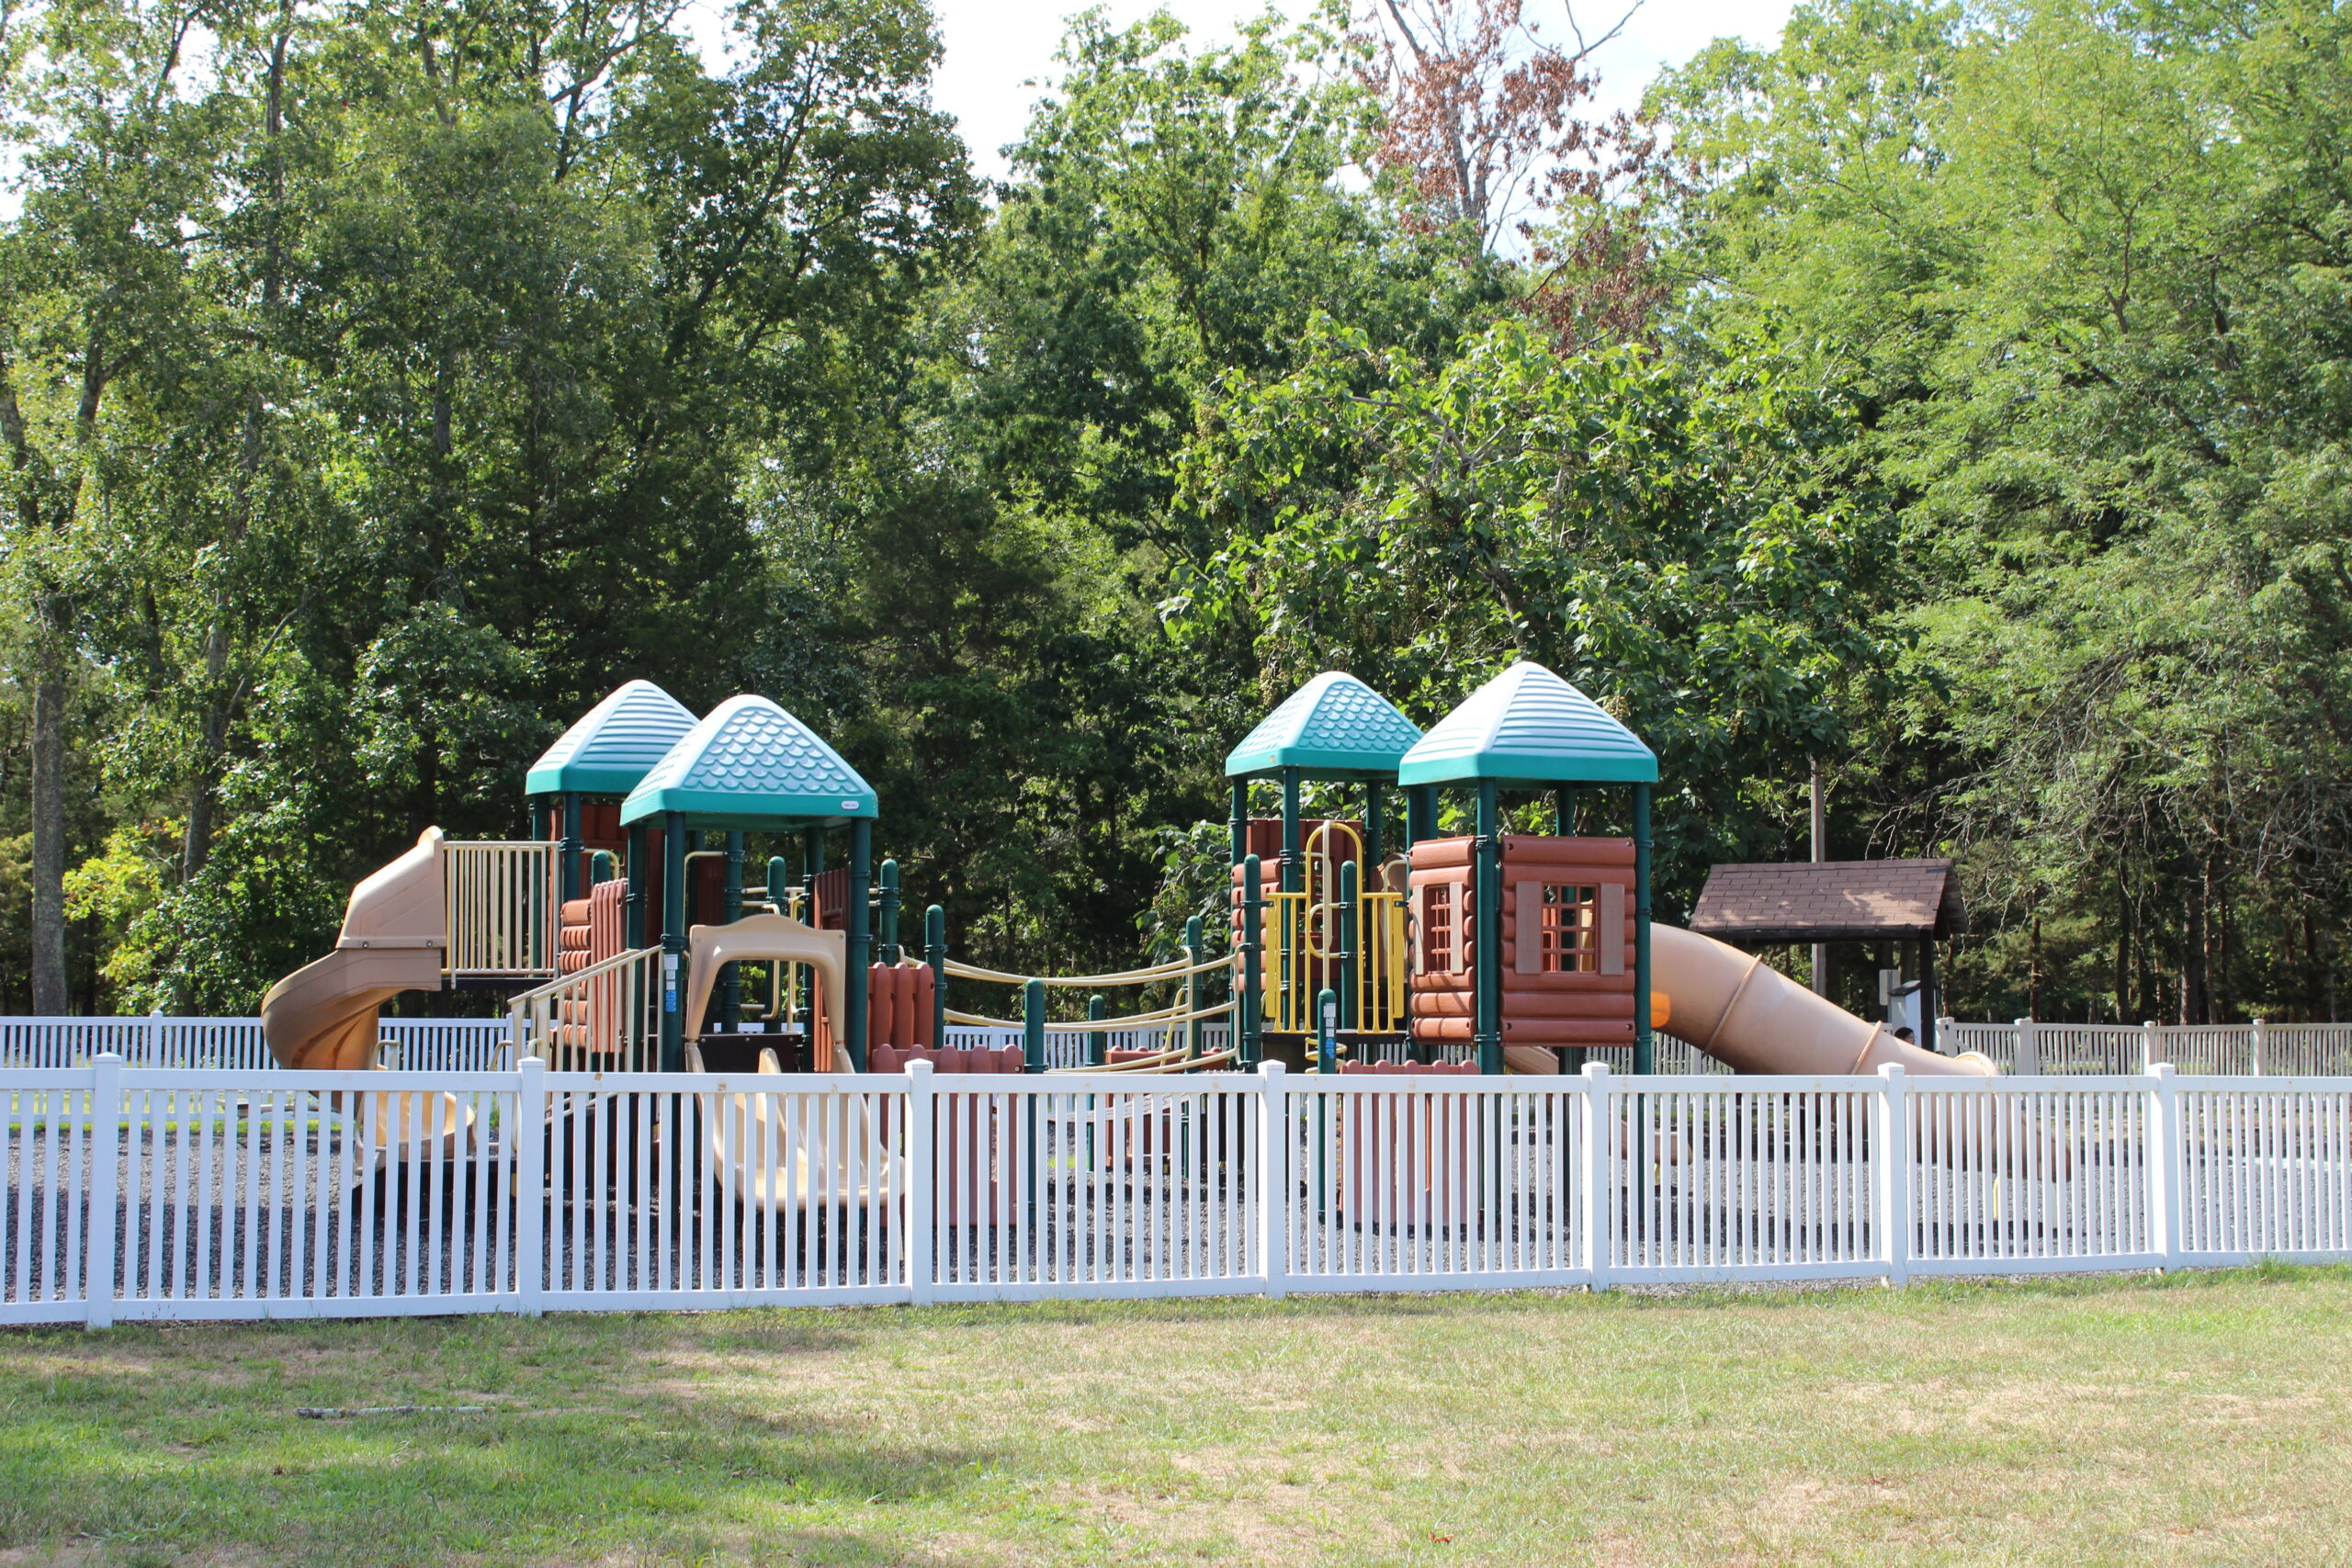 Front Estell Manor Park Playgrounds in Mays Landing NJ - WIDE image - log cabin playground